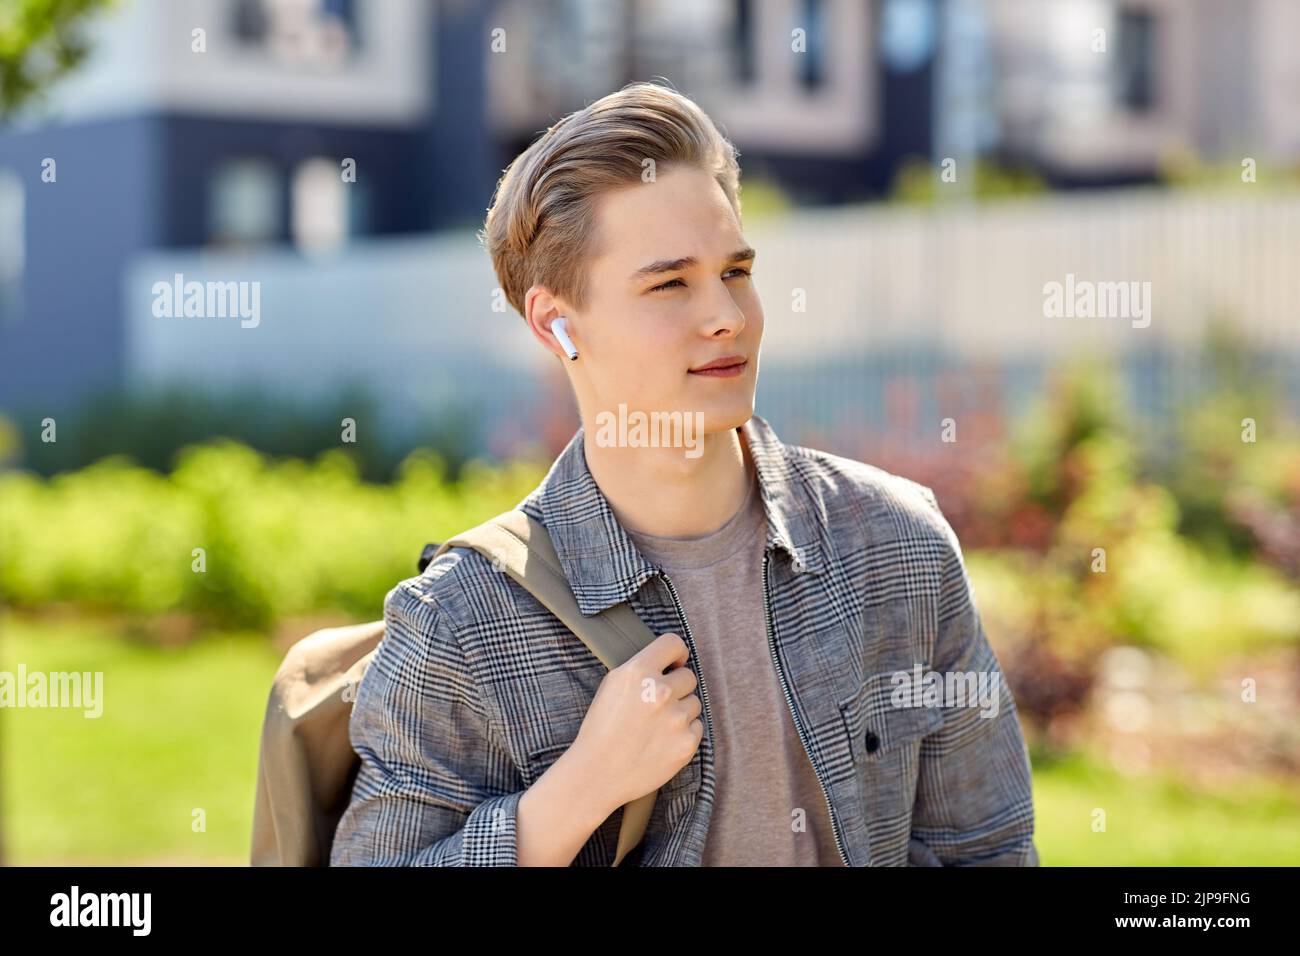 young man with earphones and backpack in city Stock Photo